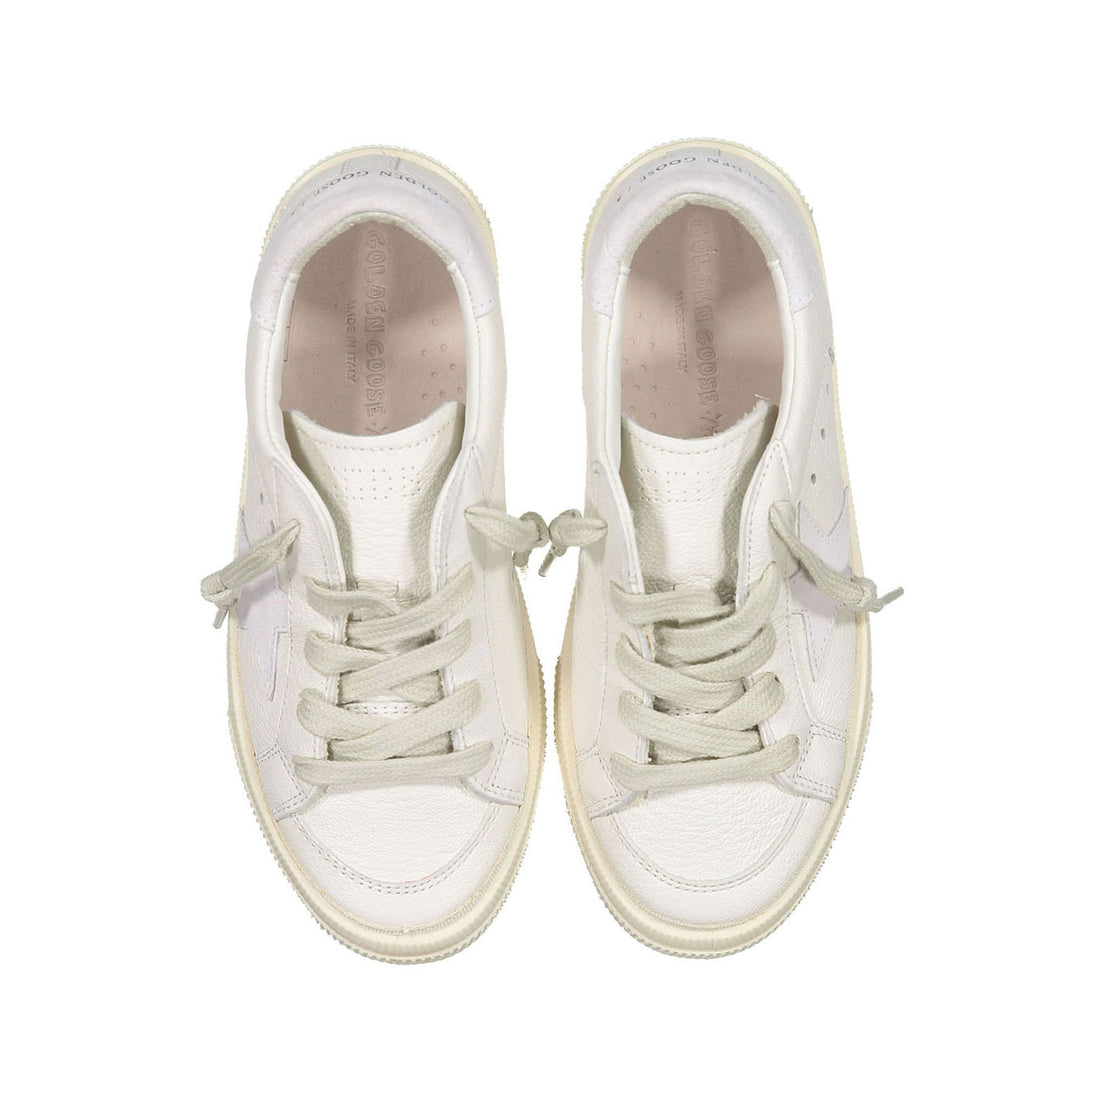 Golden Goose Optic White May Sneakers